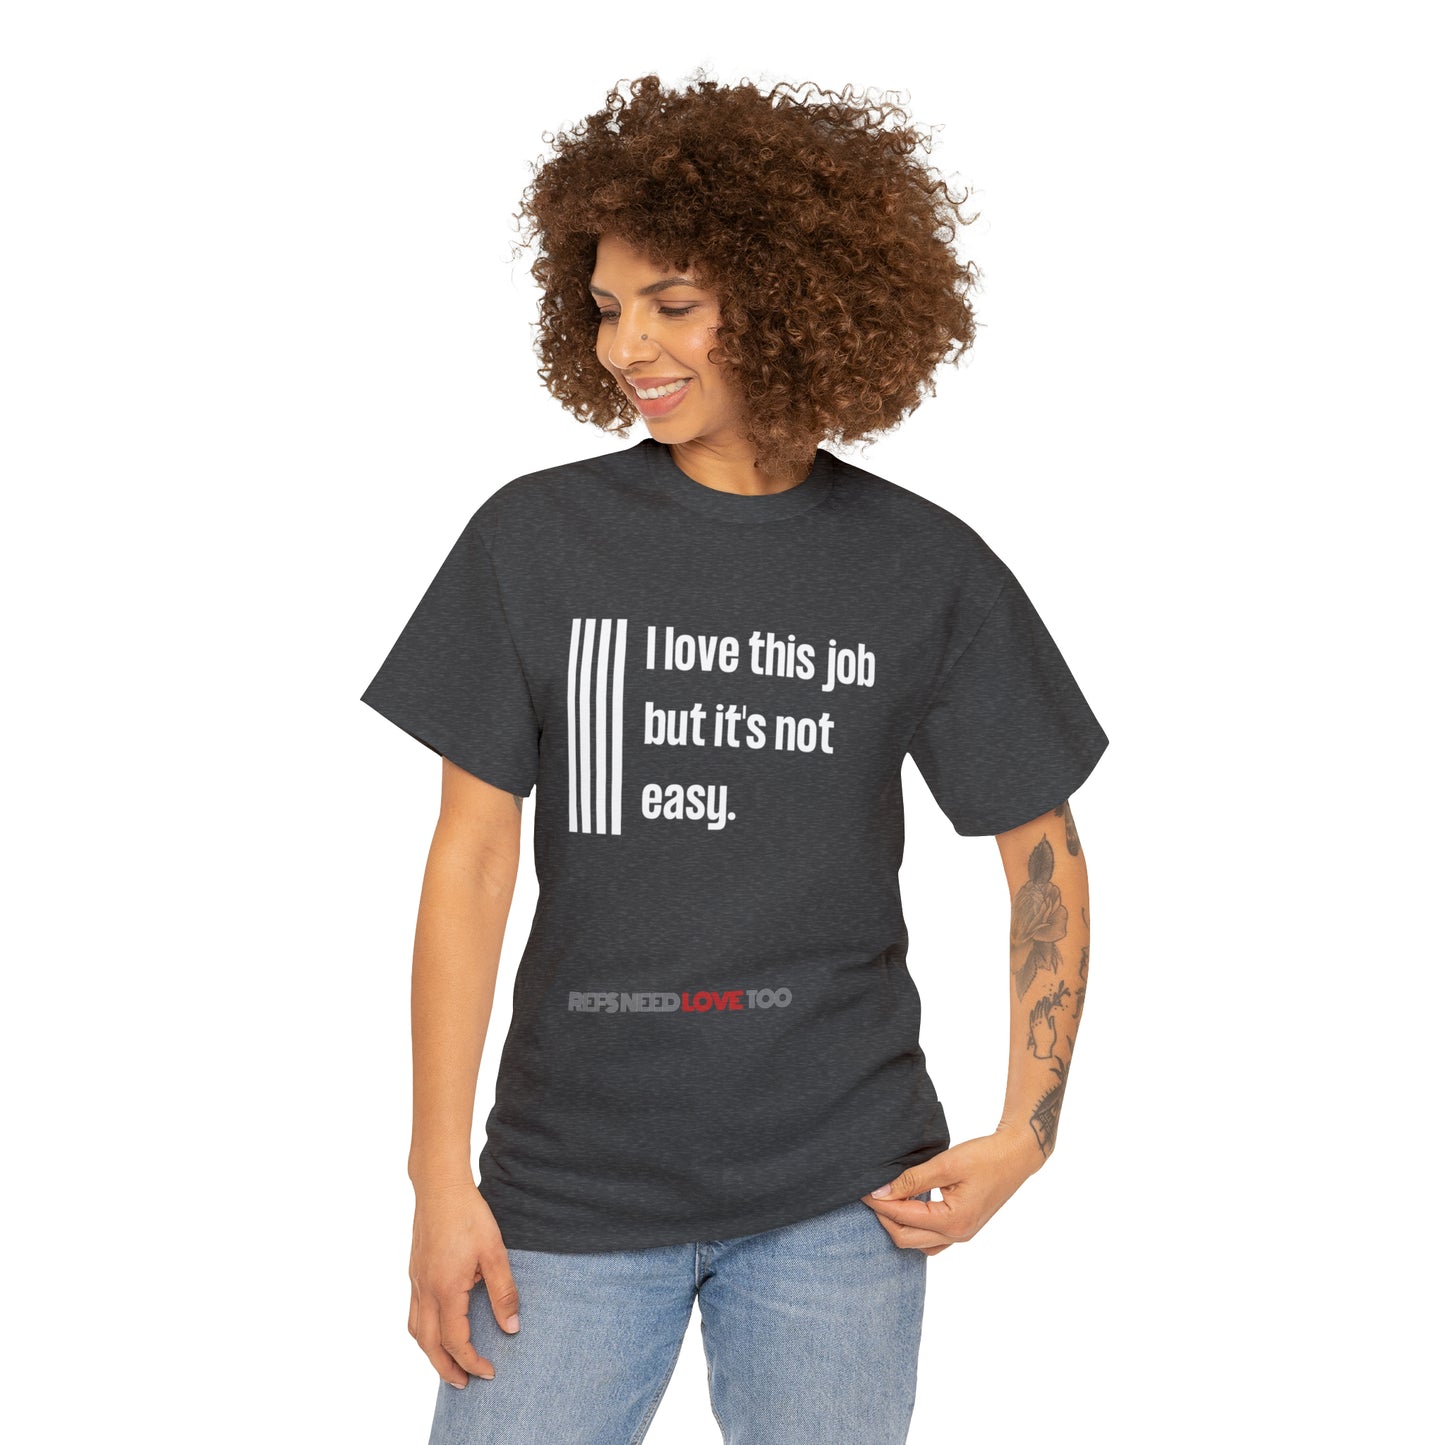 I Love This Job Unisex Cotton Tee | Gifts for Refs | For Sports Officials | Tough Job Shirt | Screen print t shirt | Refs Need Love Too